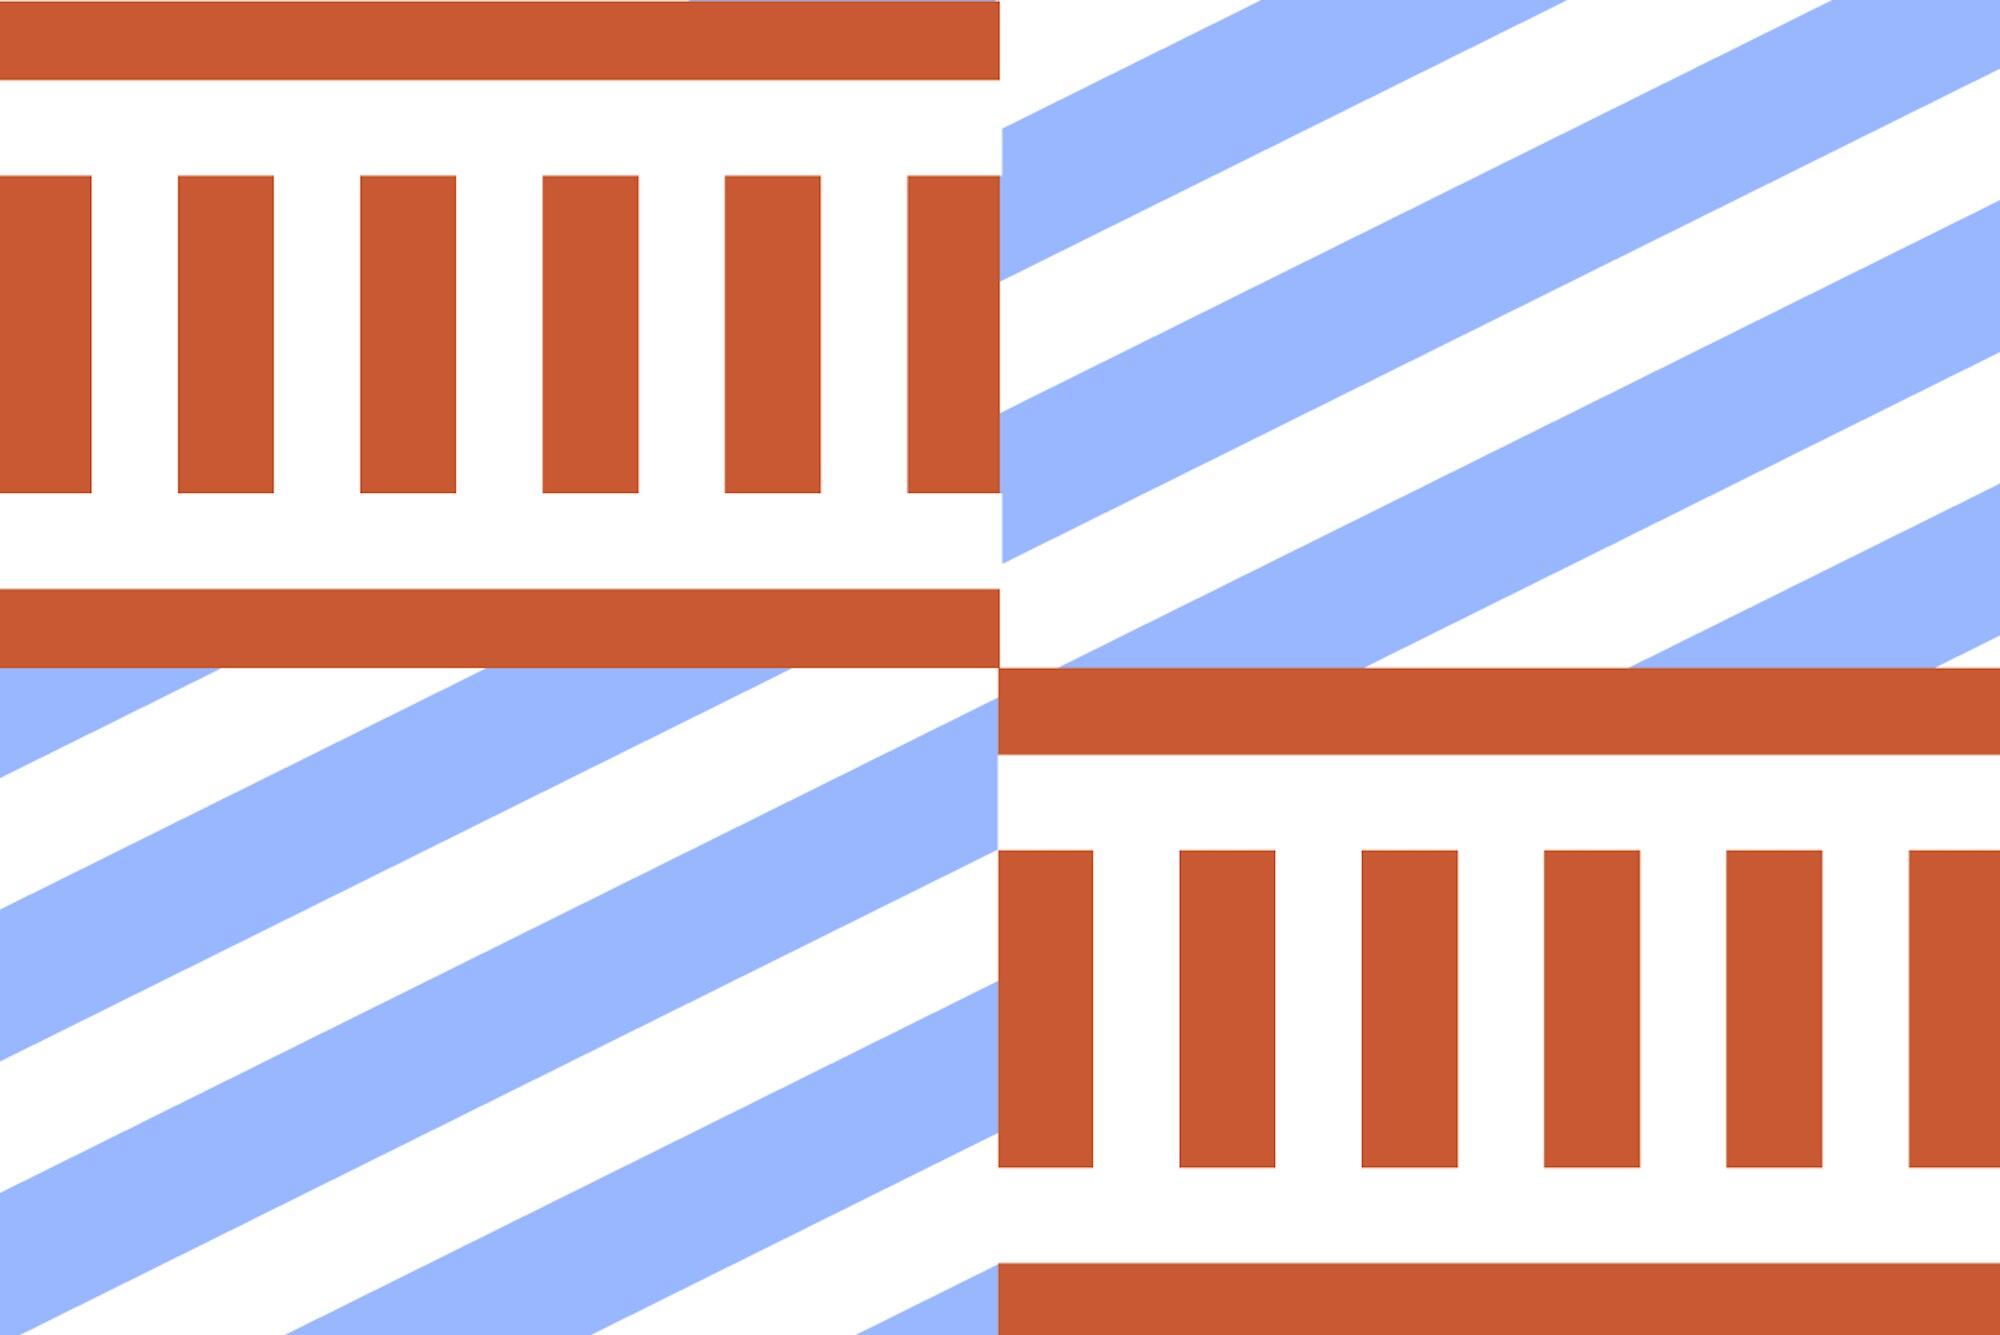 Blue diagonal stripes in the bottom left and upper right corners and red vertical stripes in the upper left and bottom right corners.